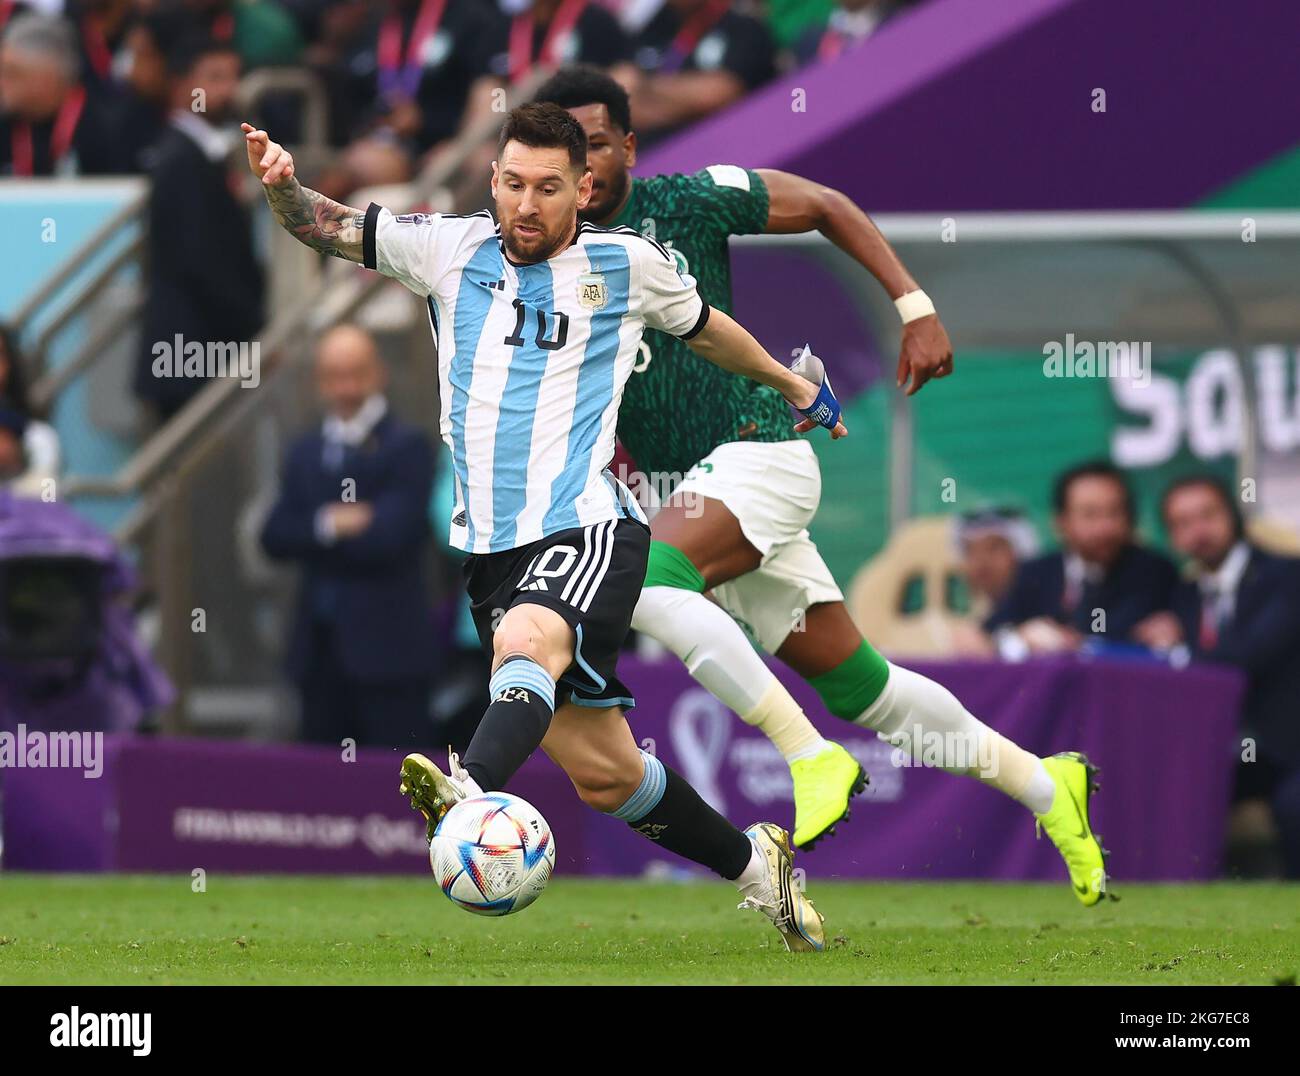 Doha, Qatar. 22nd Nov, 2022. Lionel Messi of Argentina controls the ball in front of Ali Albulayhi of Saudi Arabia during the FIFA World Cup 2022 match at Lusail Stadium, Doha. Picture credit should read: David Klein/Sportimage Credit: Sportimage/Alamy Live News Stock Photo